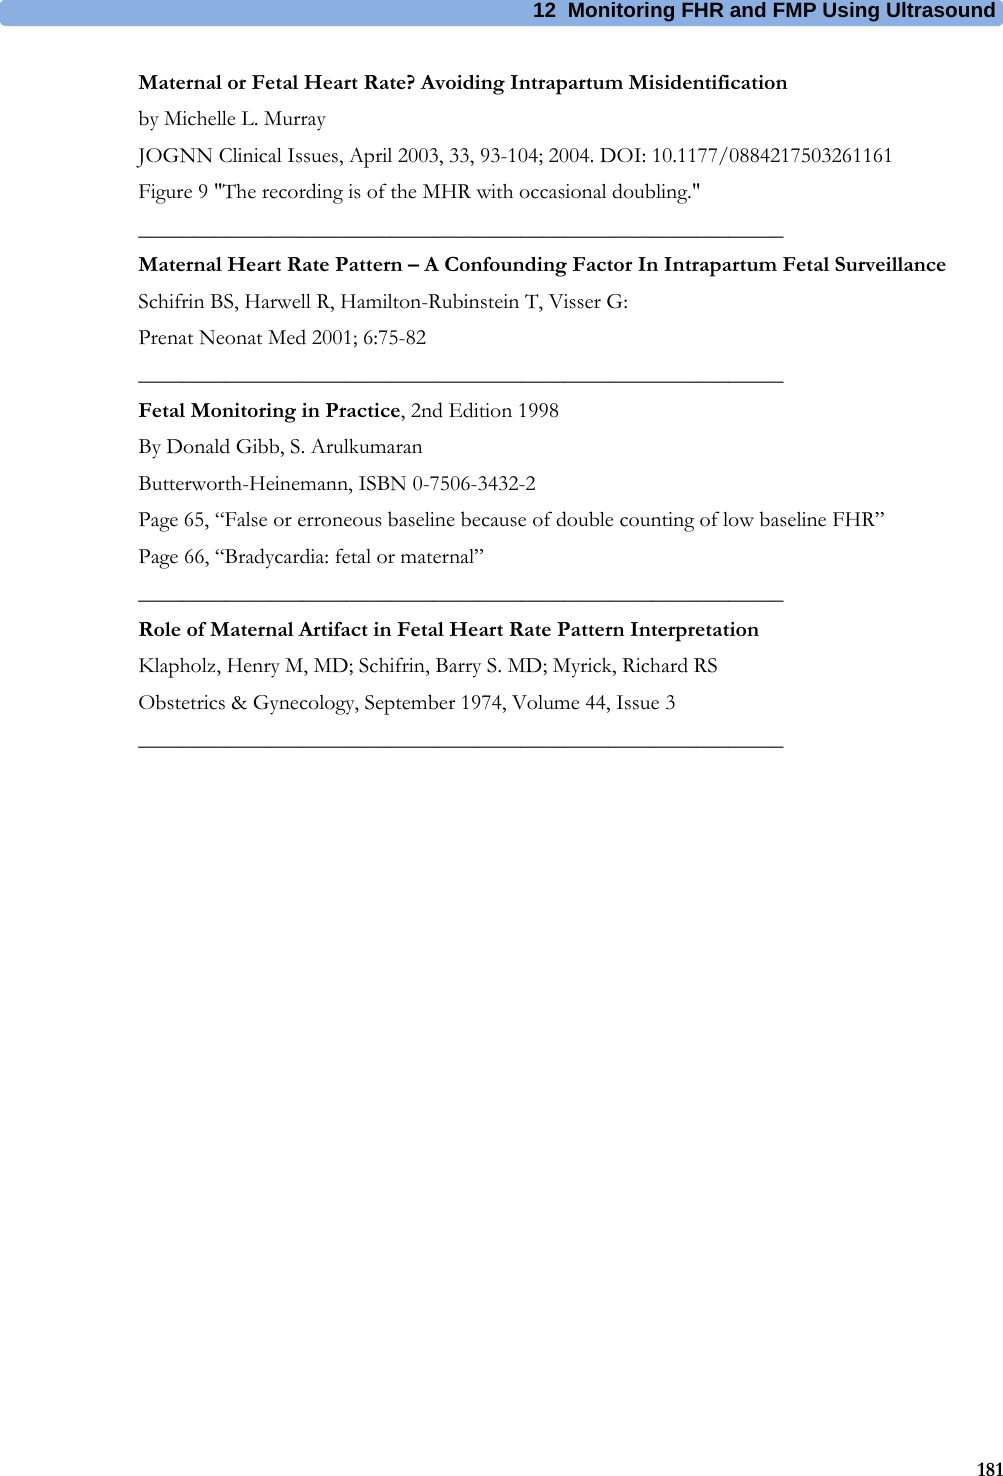 12  Monitoring FHR and FMP Using Ultrasound181Maternal or Fetal Heart Rate? Avoiding Intrapartum Misidentificationby Michelle L. MurrayJOGNN Clinical Issues, April 2003, 33, 93-104; 2004. DOI: 10.1177/0884217503261161Figure 9 &quot;The recording is of the MHR with occasional doubling.&quot;___________________________________________________________Maternal Heart Rate Pattern – A Confounding Factor In Intrapartum Fetal SurveillanceSchifrin BS, Harwell R, Hamilton-Rubinstein T, Visser G:Prenat Neonat Med 2001; 6:75-82___________________________________________________________Fetal Monitoring in Practice, 2nd Edition 1998By Donald Gibb, S. ArulkumaranButterworth-Heinemann, ISBN 0-7506-3432-2Page 65, “False or erroneous baseline because of double counting of low baseline FHR”Page 66, “Bradycardia: fetal or maternal”___________________________________________________________Role of Maternal Artifact in Fetal Heart Rate Pattern InterpretationKlapholz, Henry M, MD; Schifrin, Barry S. MD; Myrick, Richard RSObstetrics &amp; Gynecology, September 1974, Volume 44, Issue 3___________________________________________________________